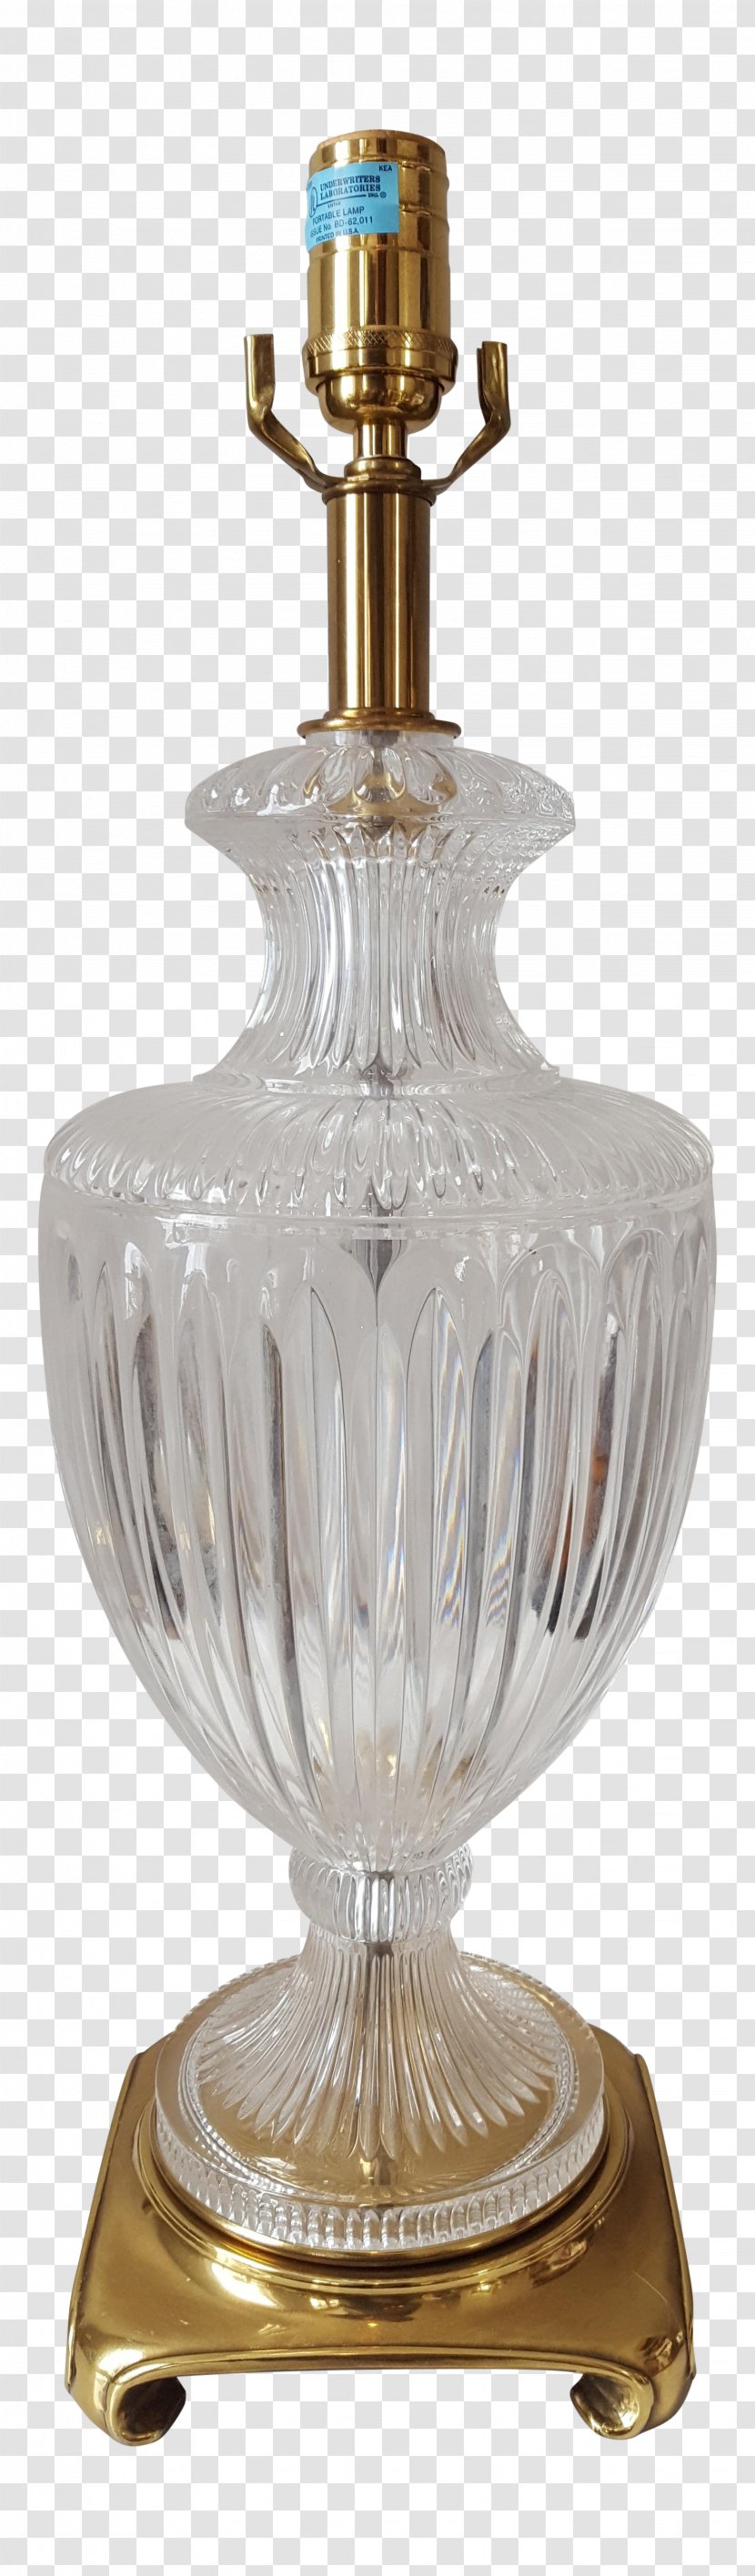 Table Light Lead Glass Lamp - Incandescent Bulb - Crystal Transparent PNG